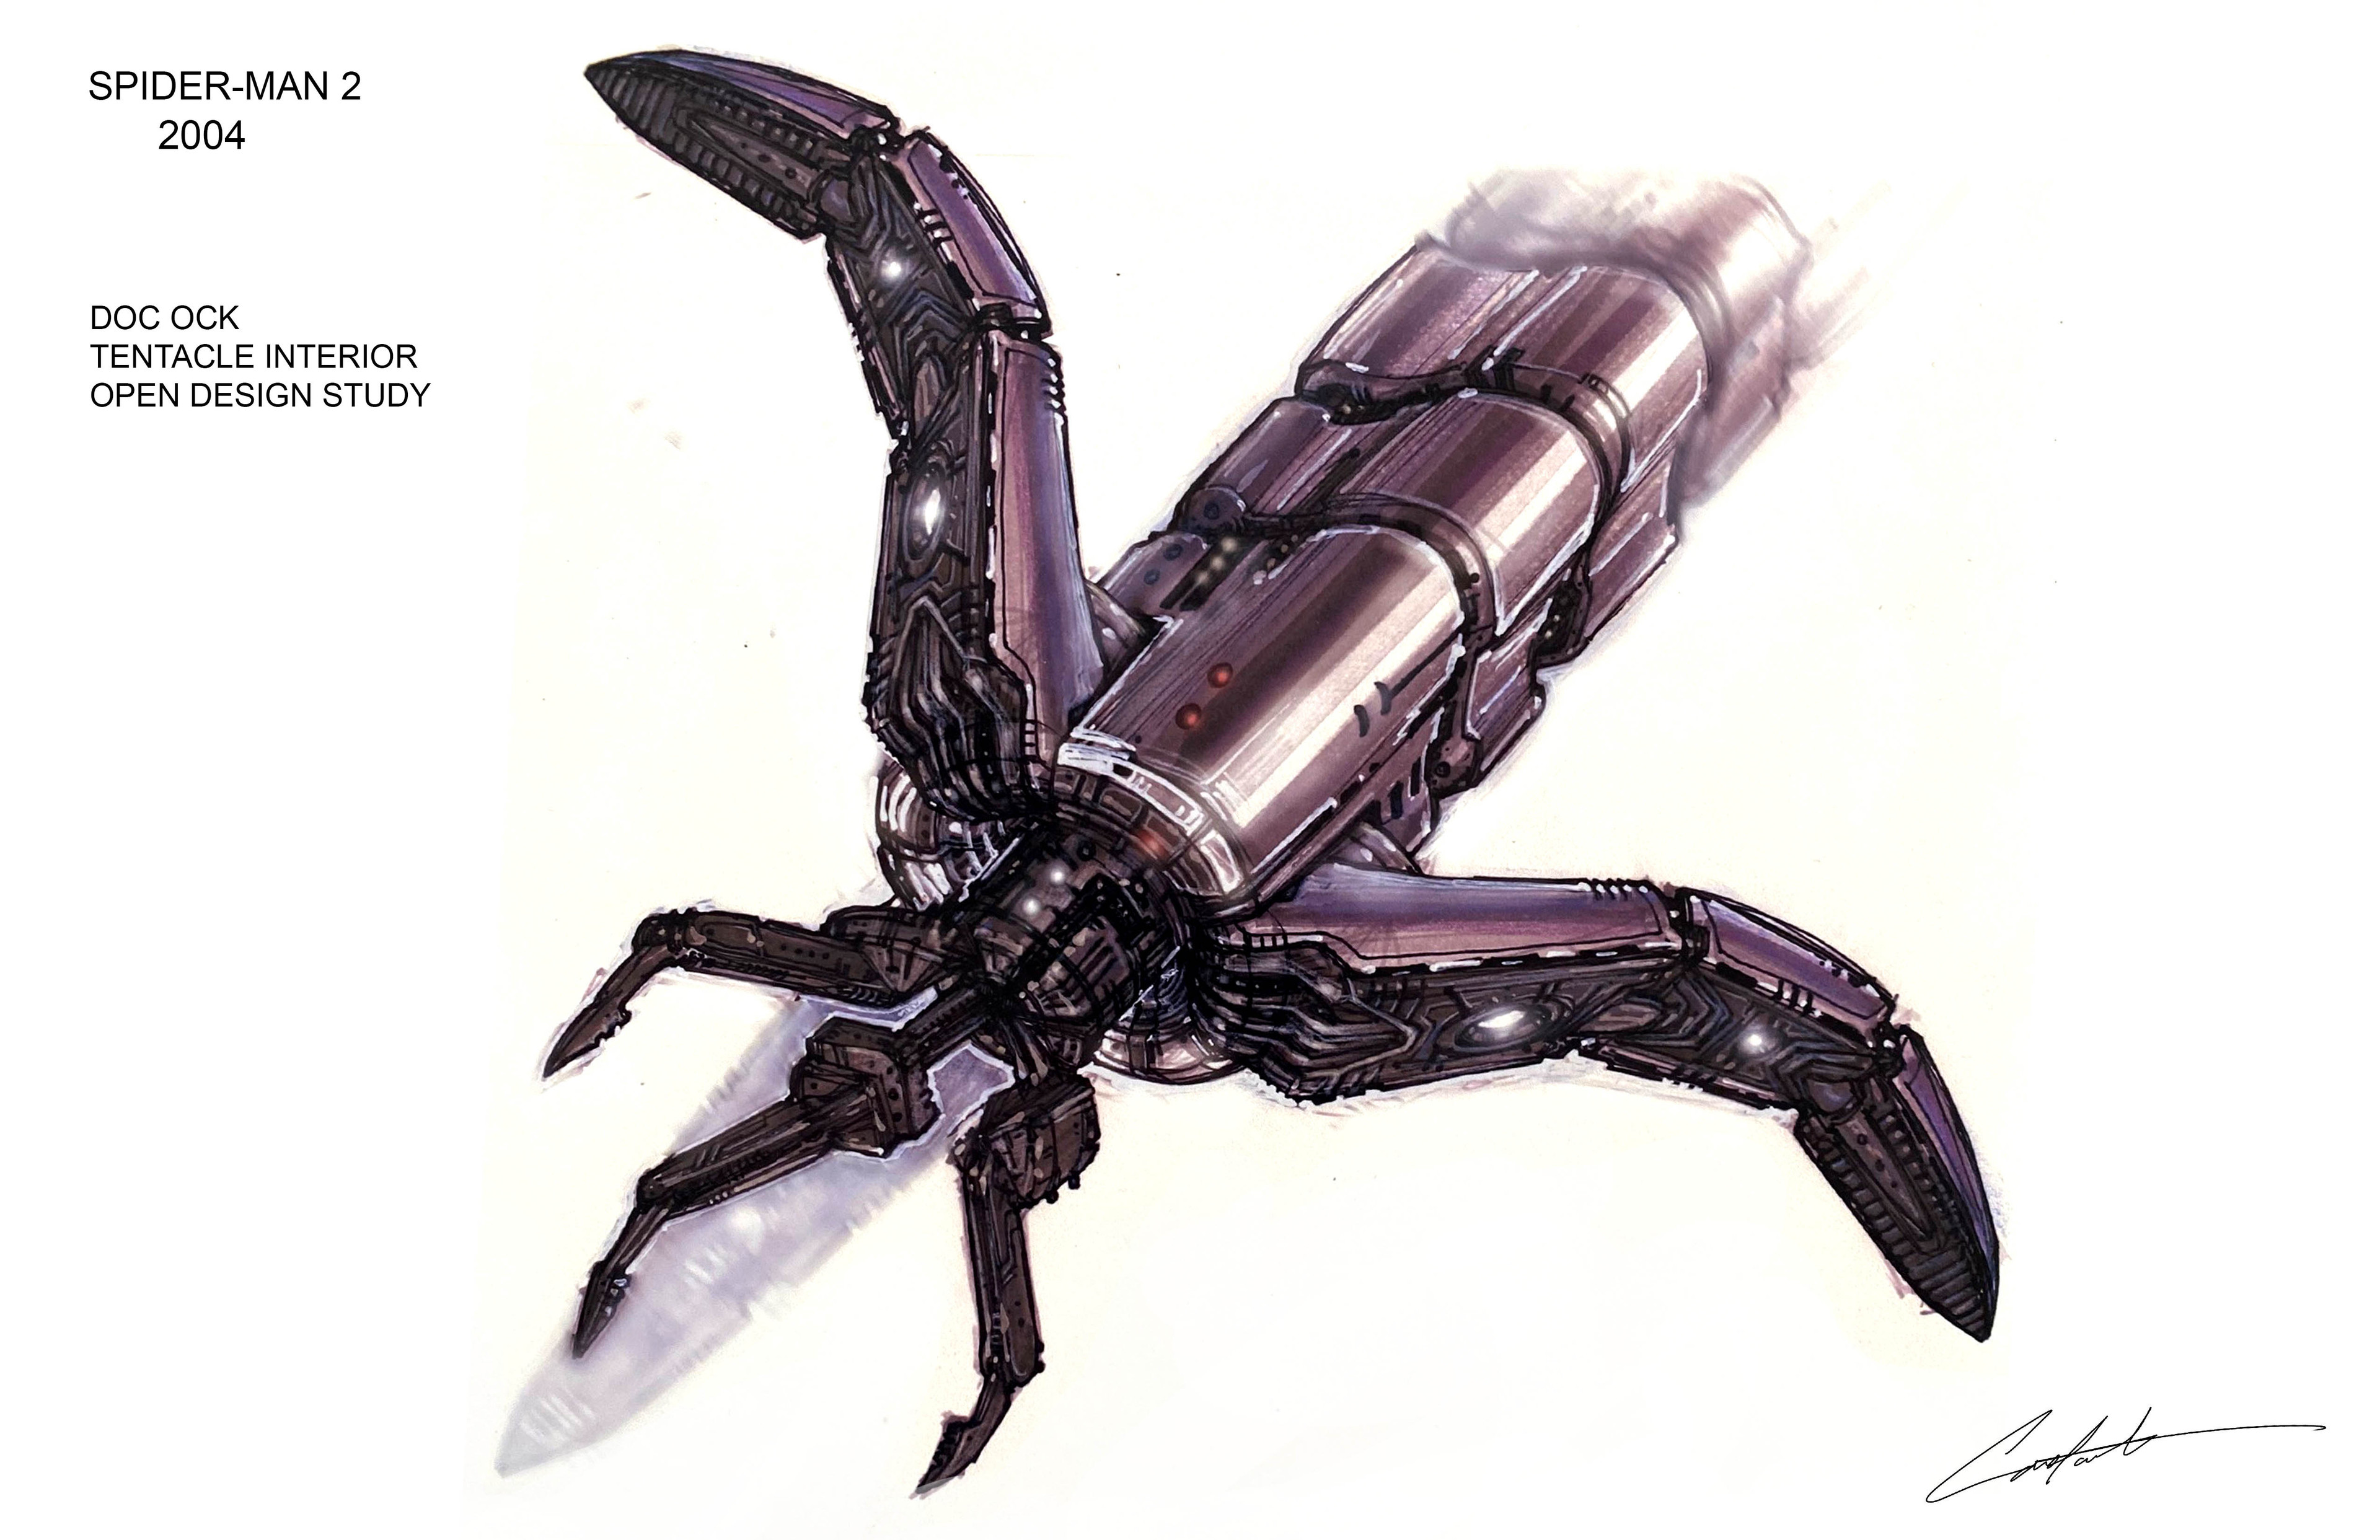 Spider-man 2 Doc Ock open head tentacle study from 2004